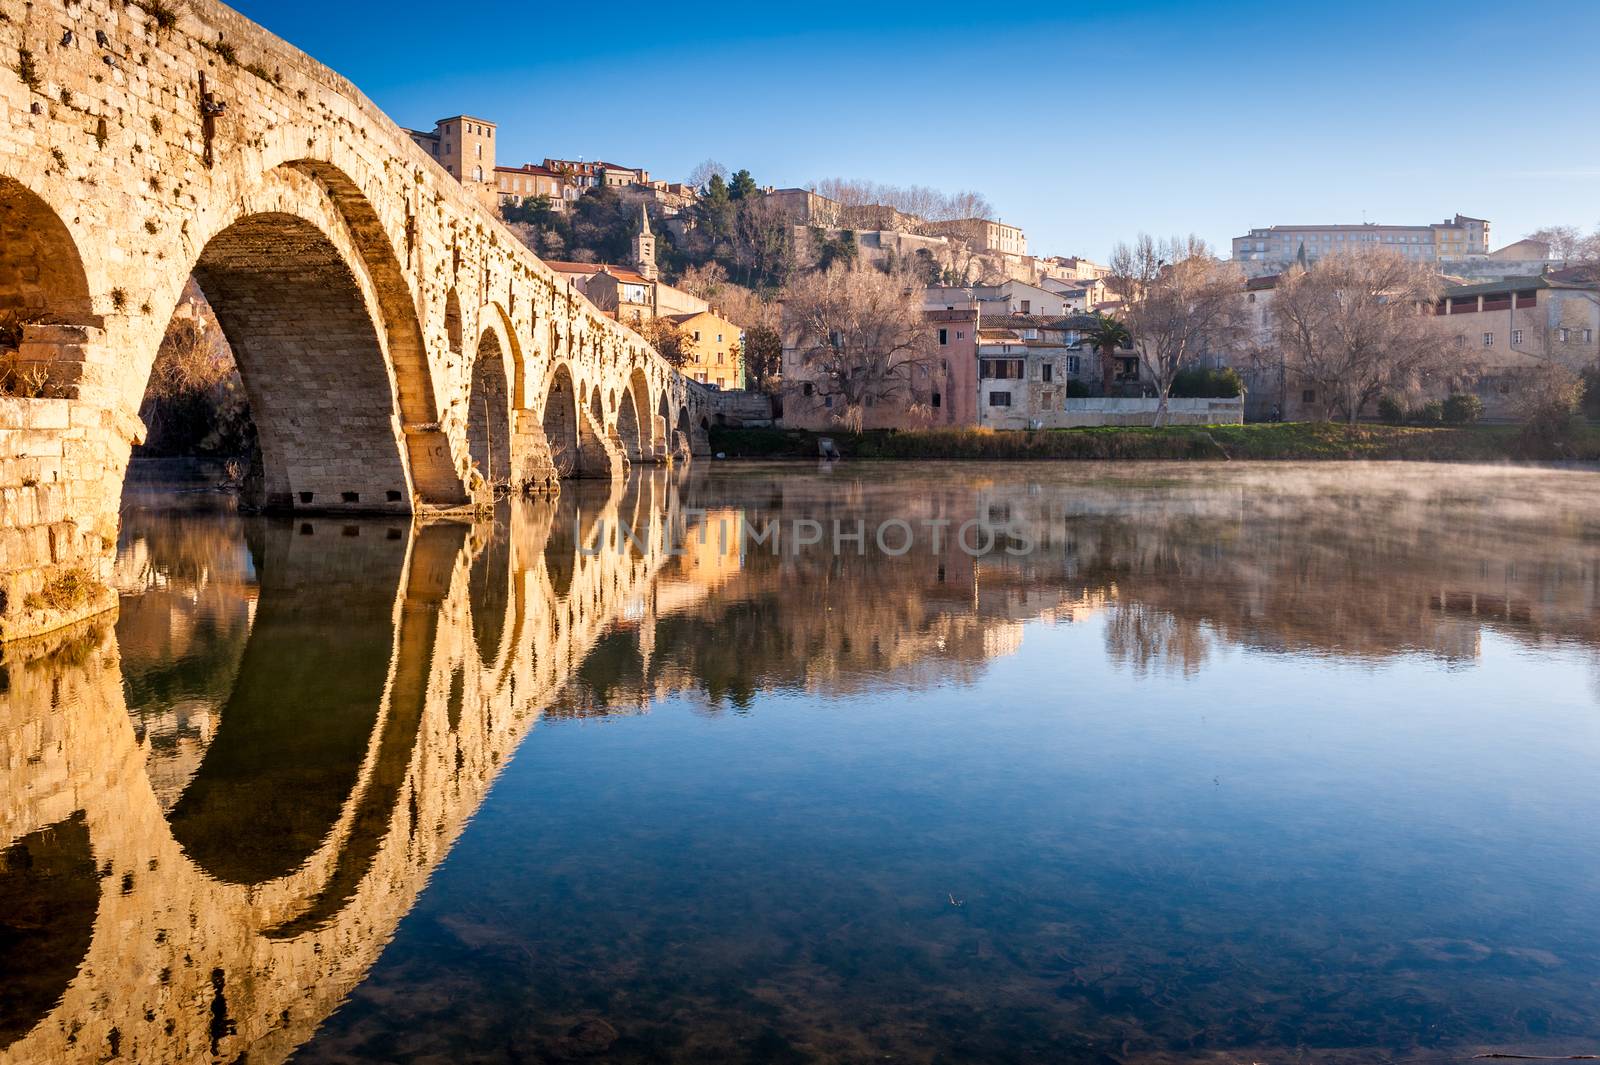 Perfect reflection worthy of a mirror, from the old bridge, on the calm water of the river Orb, one winter morning, at Béziers in the Hérault in Occitanie in the south of France